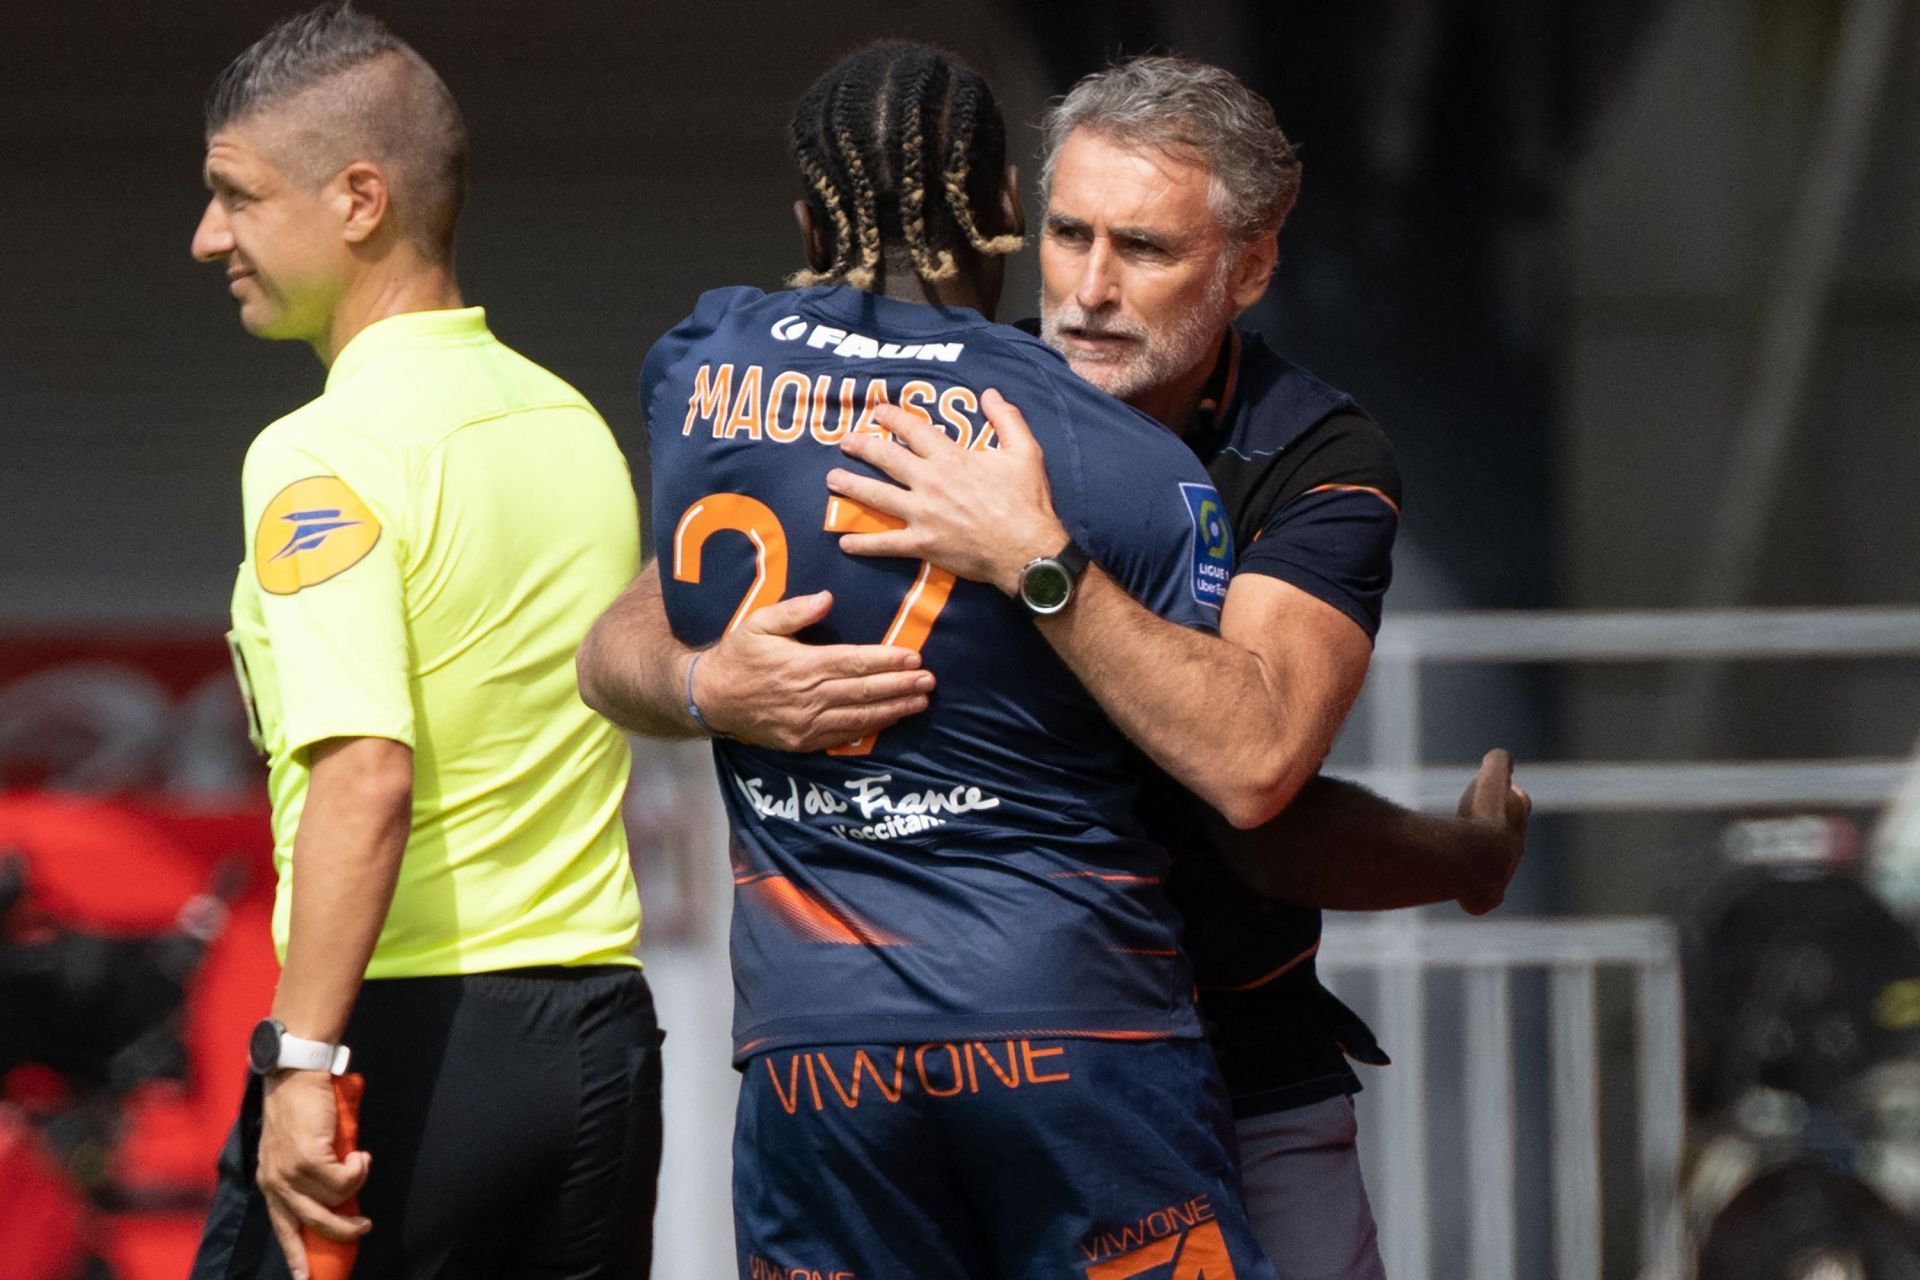 Montpellier will face Ajaccio on Wednesday - Ligue 1 